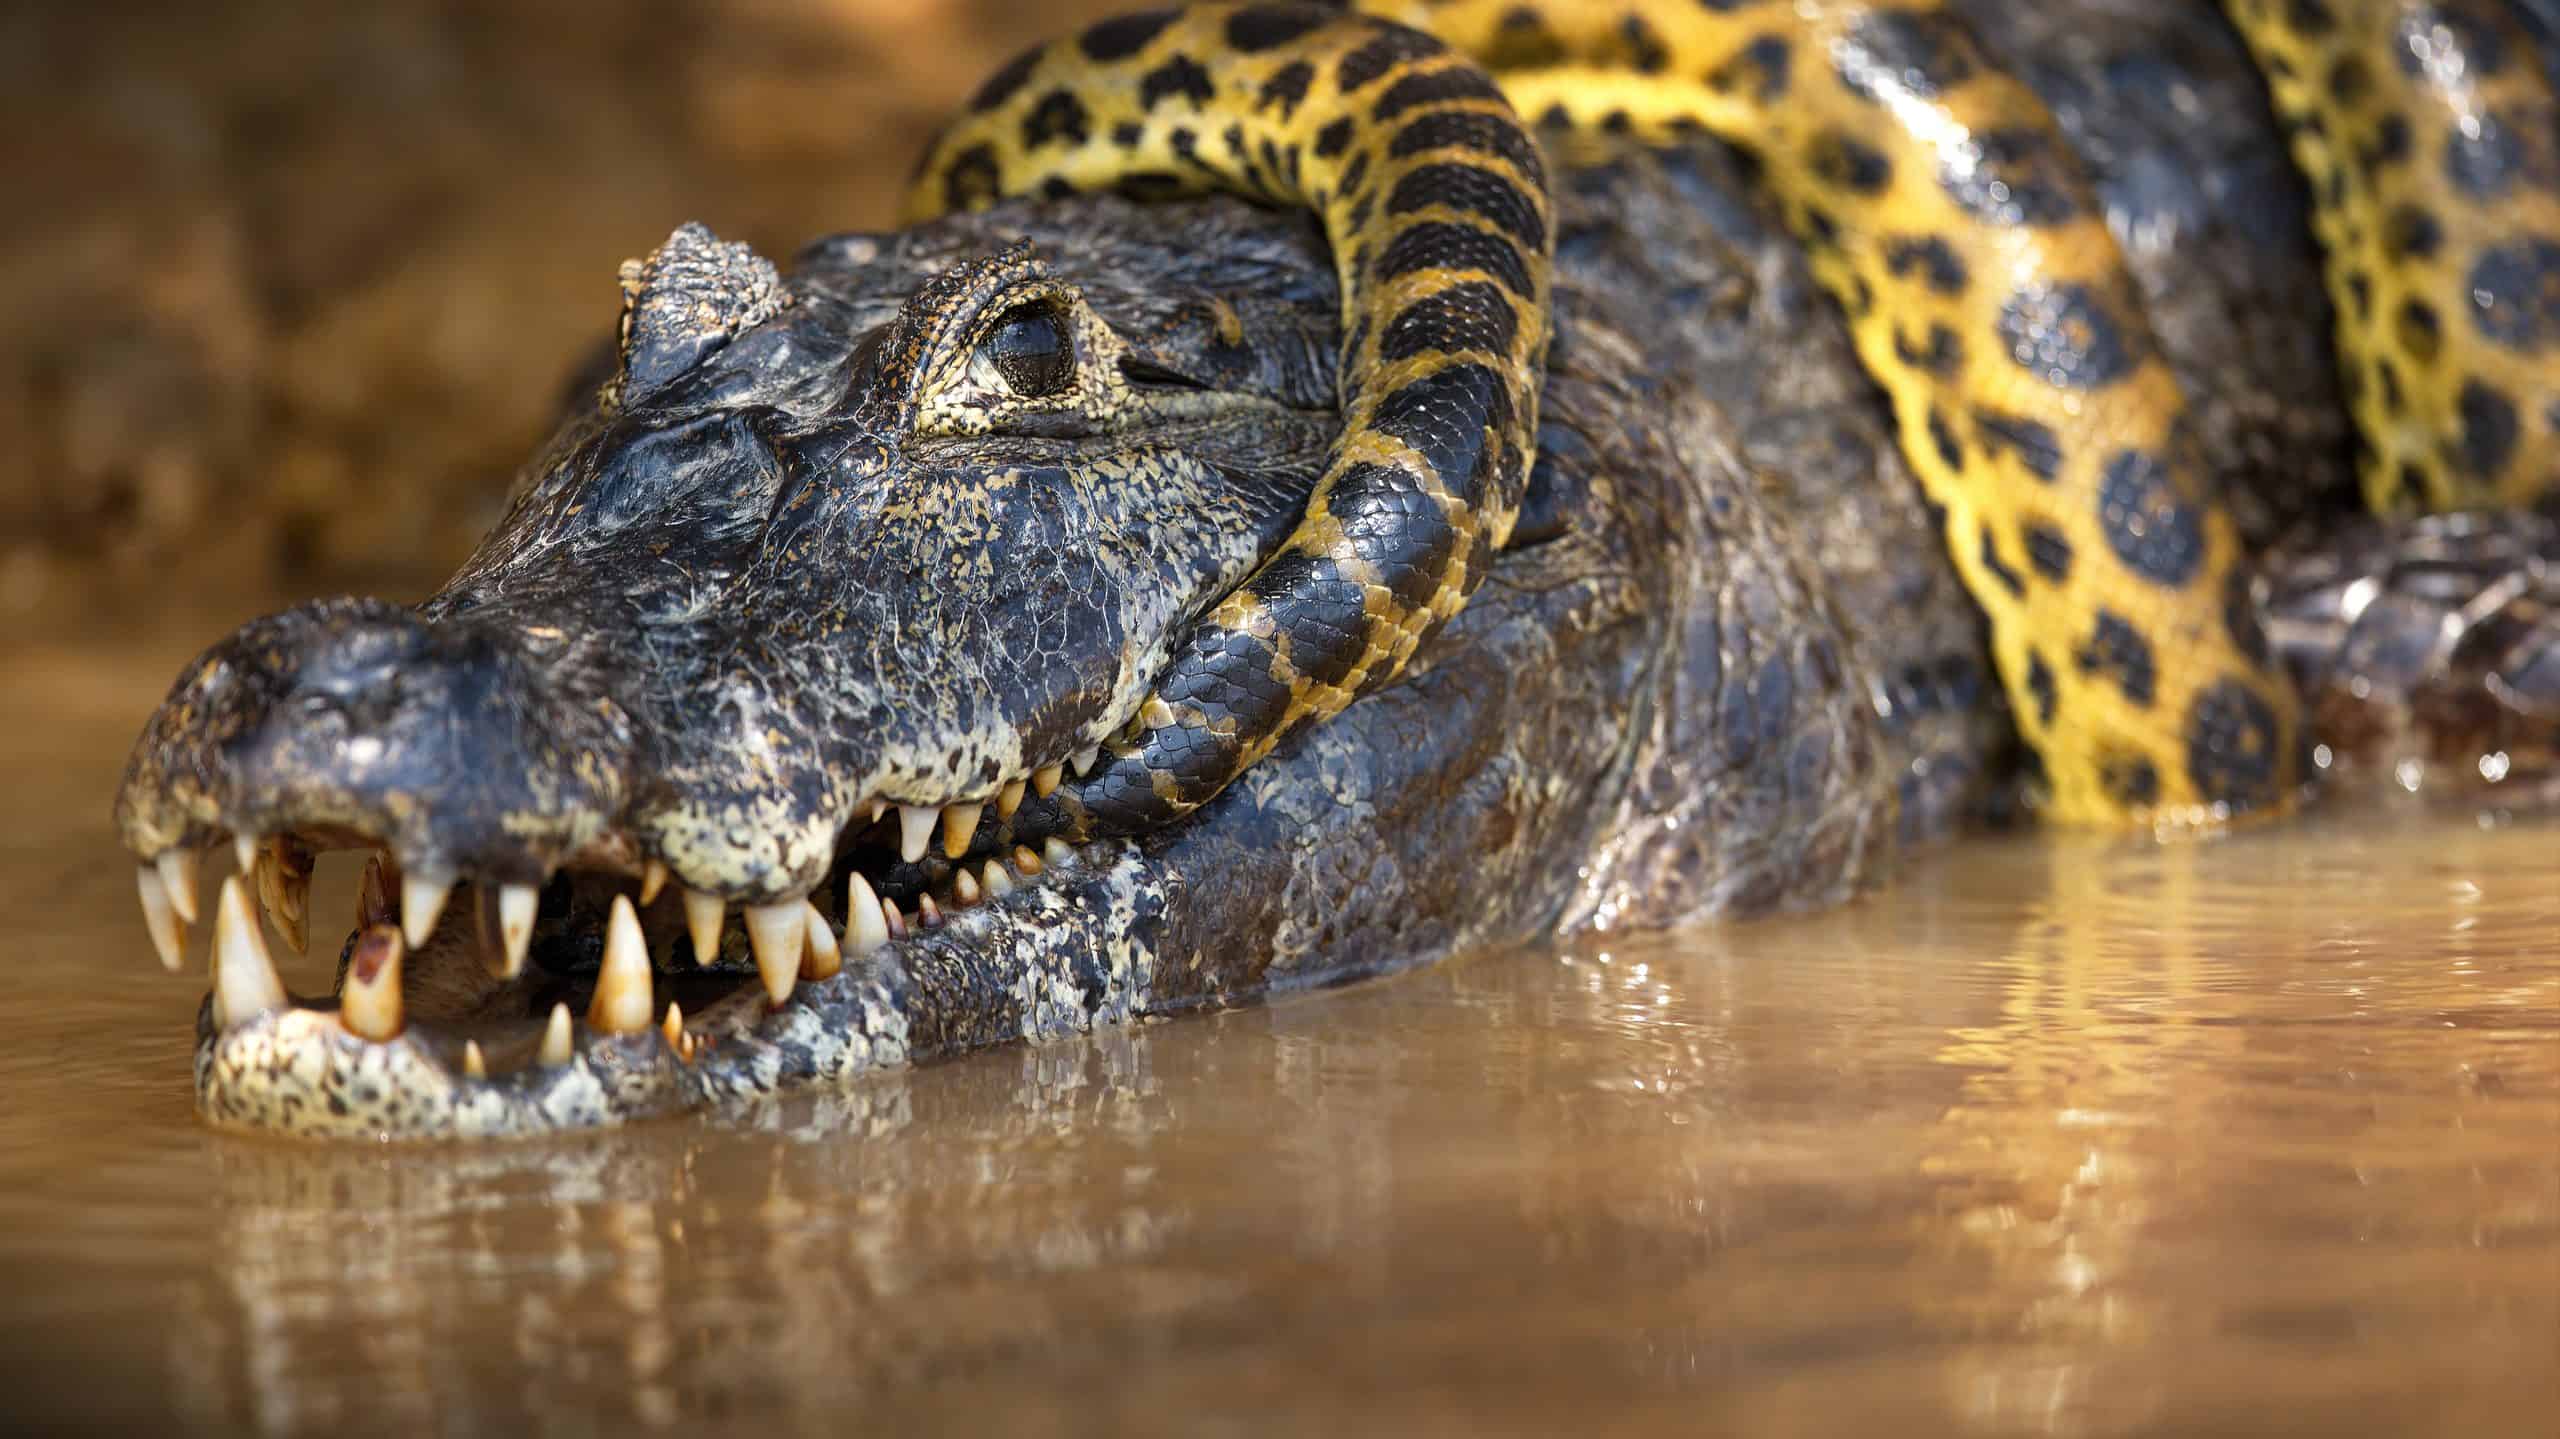 A closeup of ananaconda snake wrapped around an alligator in a pond in Pantanal, Brazil